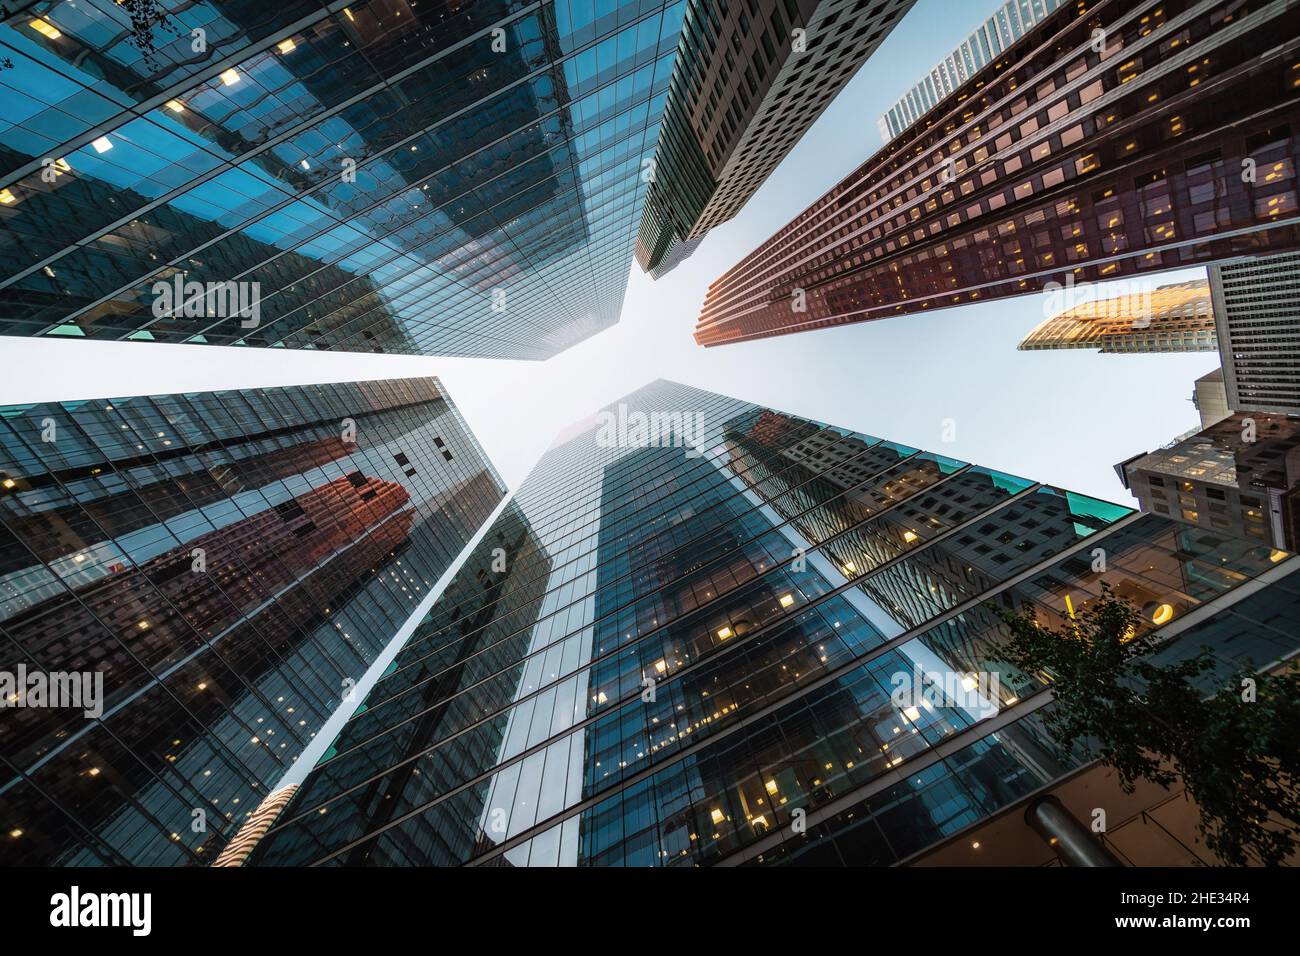 Business and finance concept, looking up at high rise office building architecture in the financial district of a modern metropolis. Stock Photo